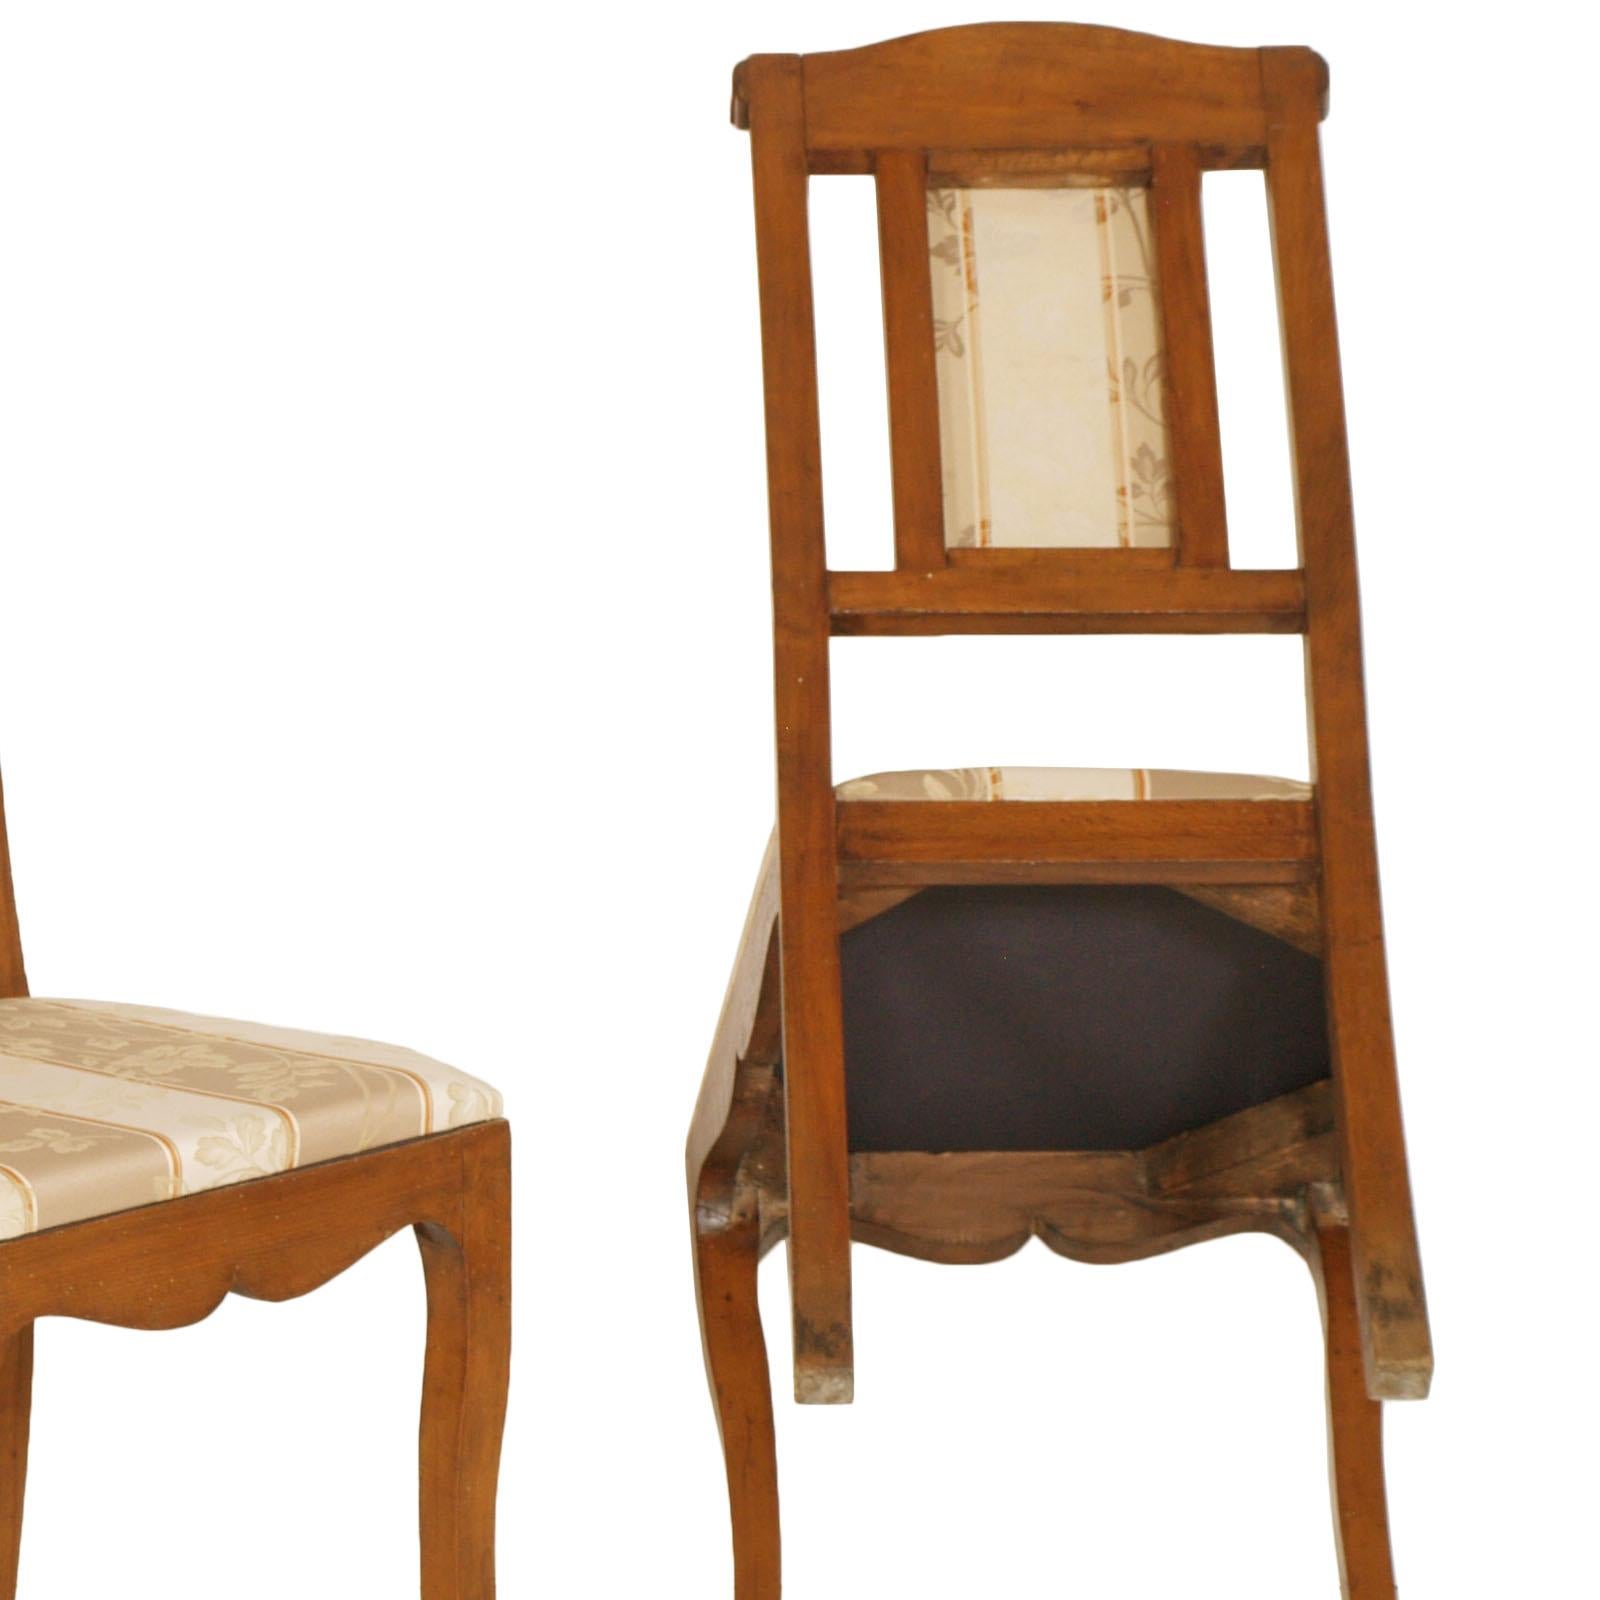 Art Nouveau Pair of Side Chairs in Walnut, Restored & New Upholstered For Sale 2